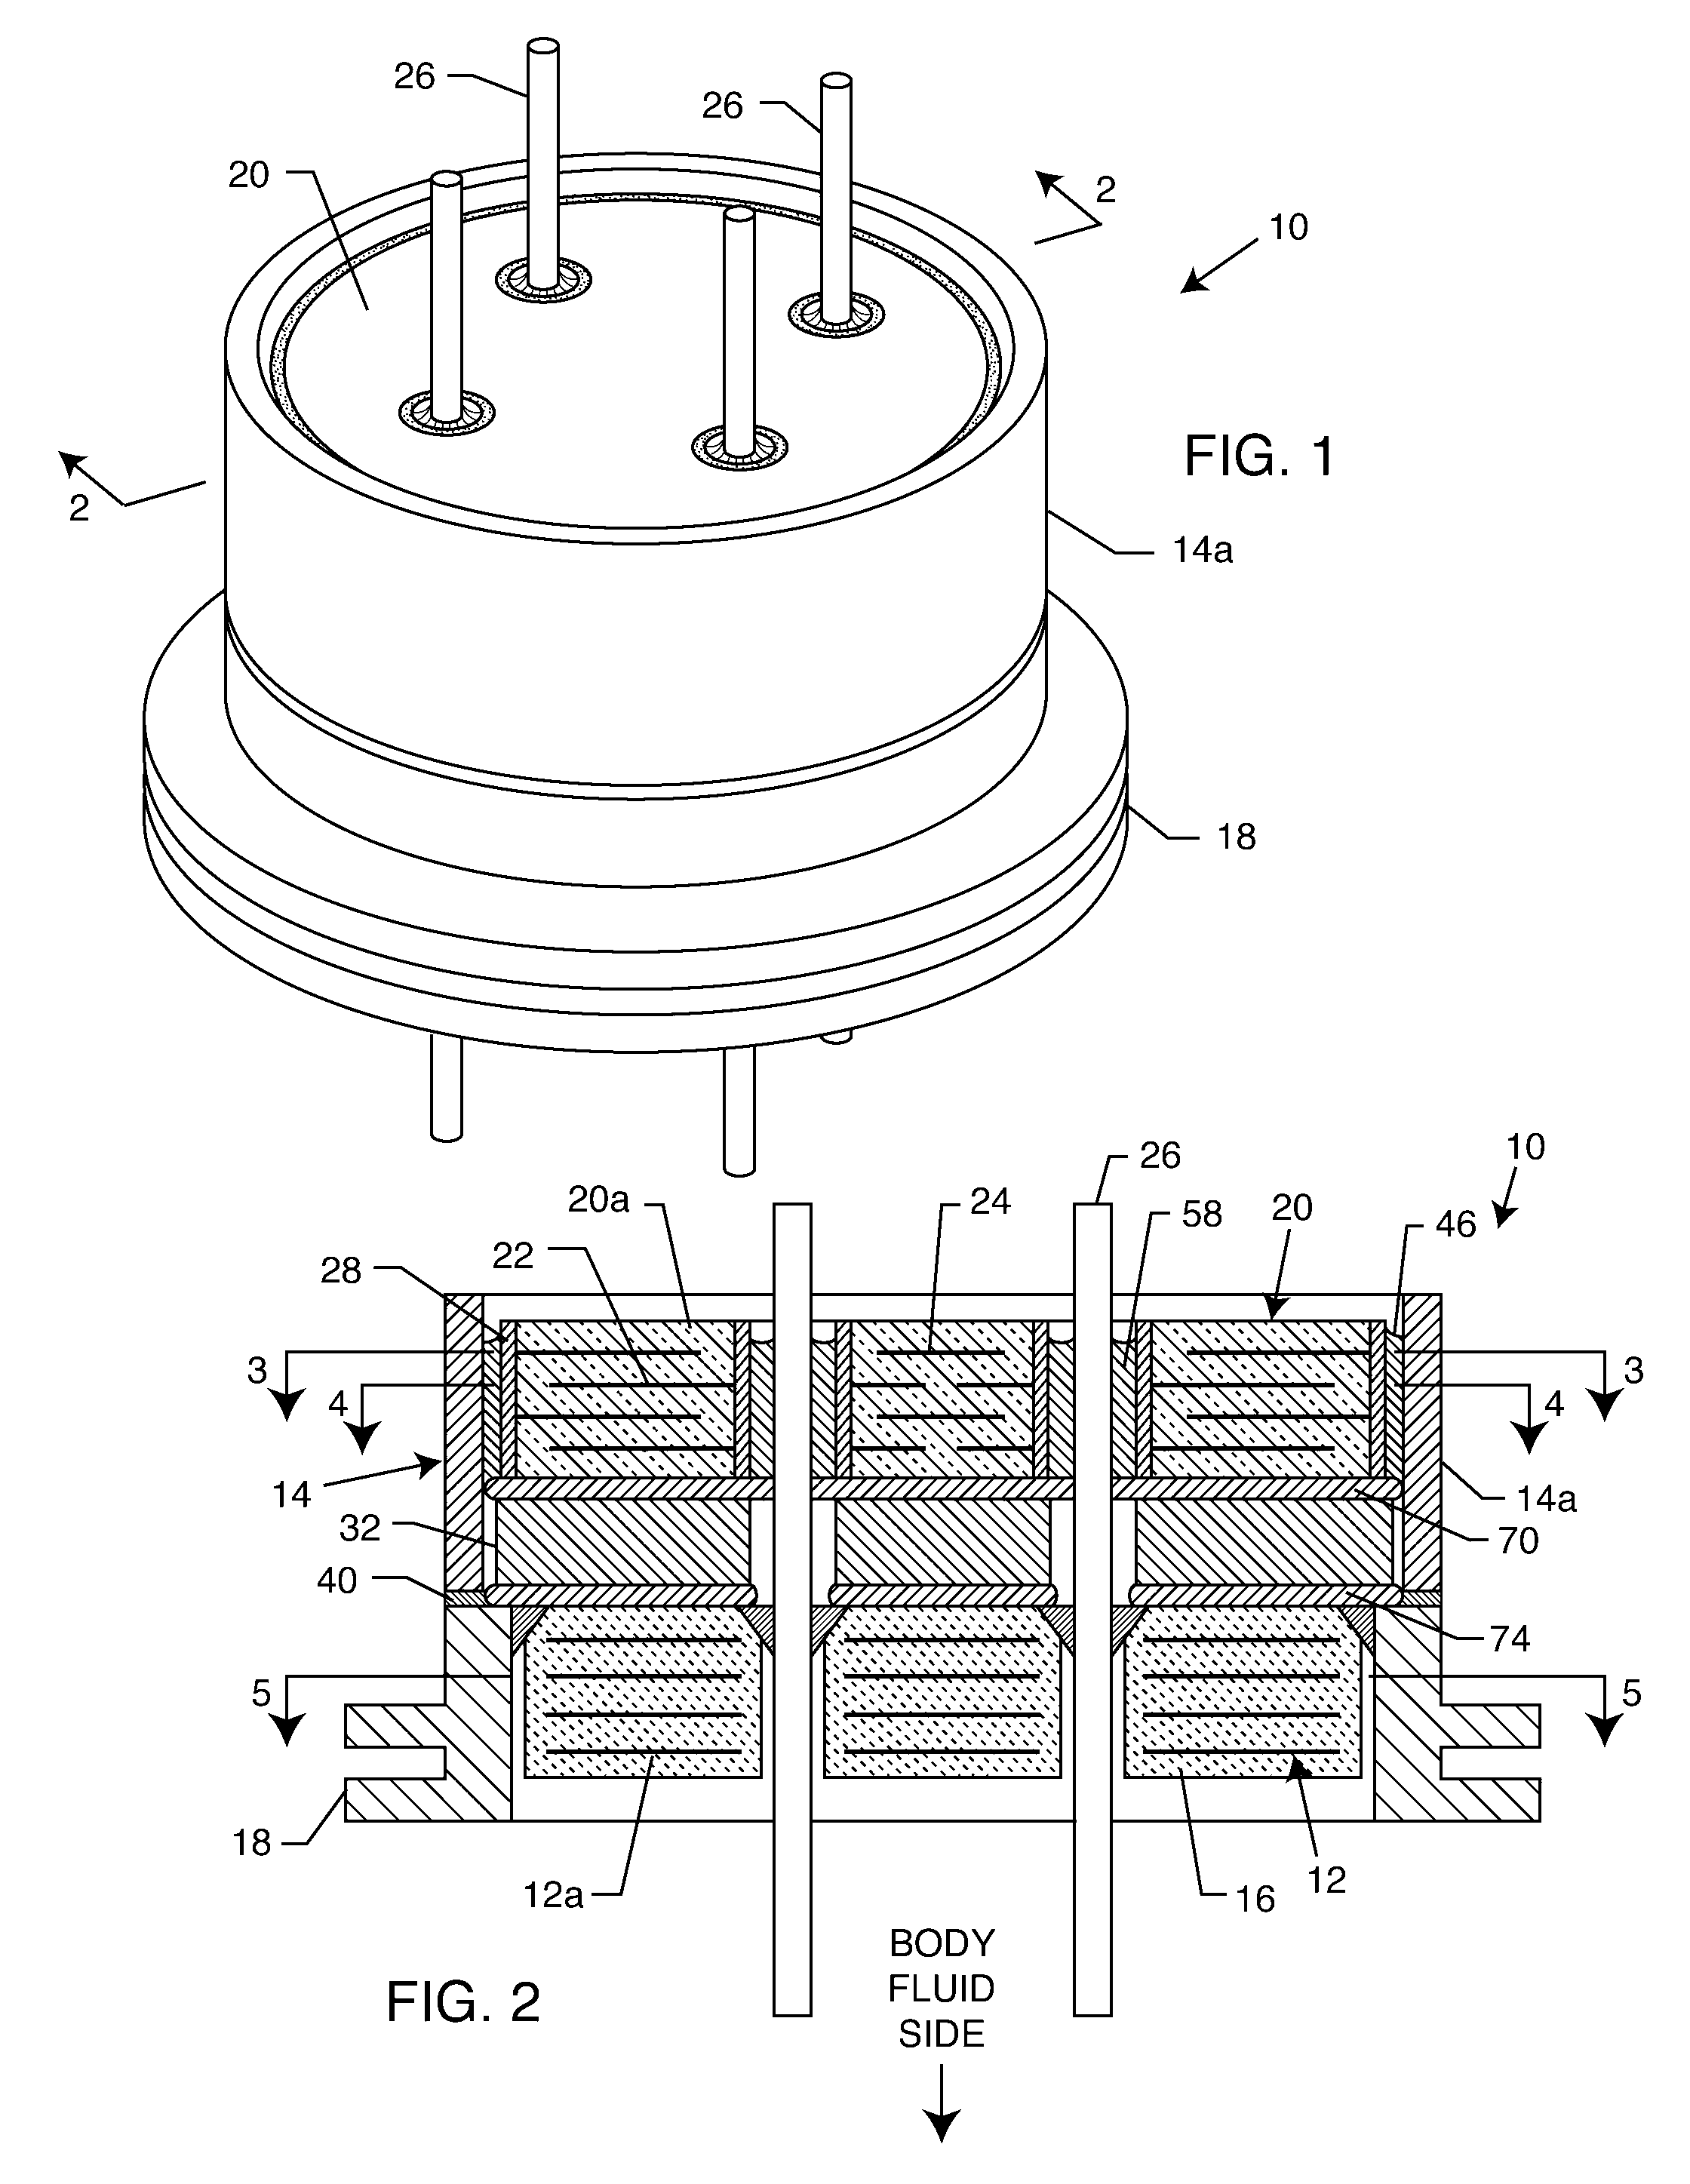 Apparatus and process for reducing the susceptibility of active implantable medical devices to medical procedures such as magentic resonance imaging